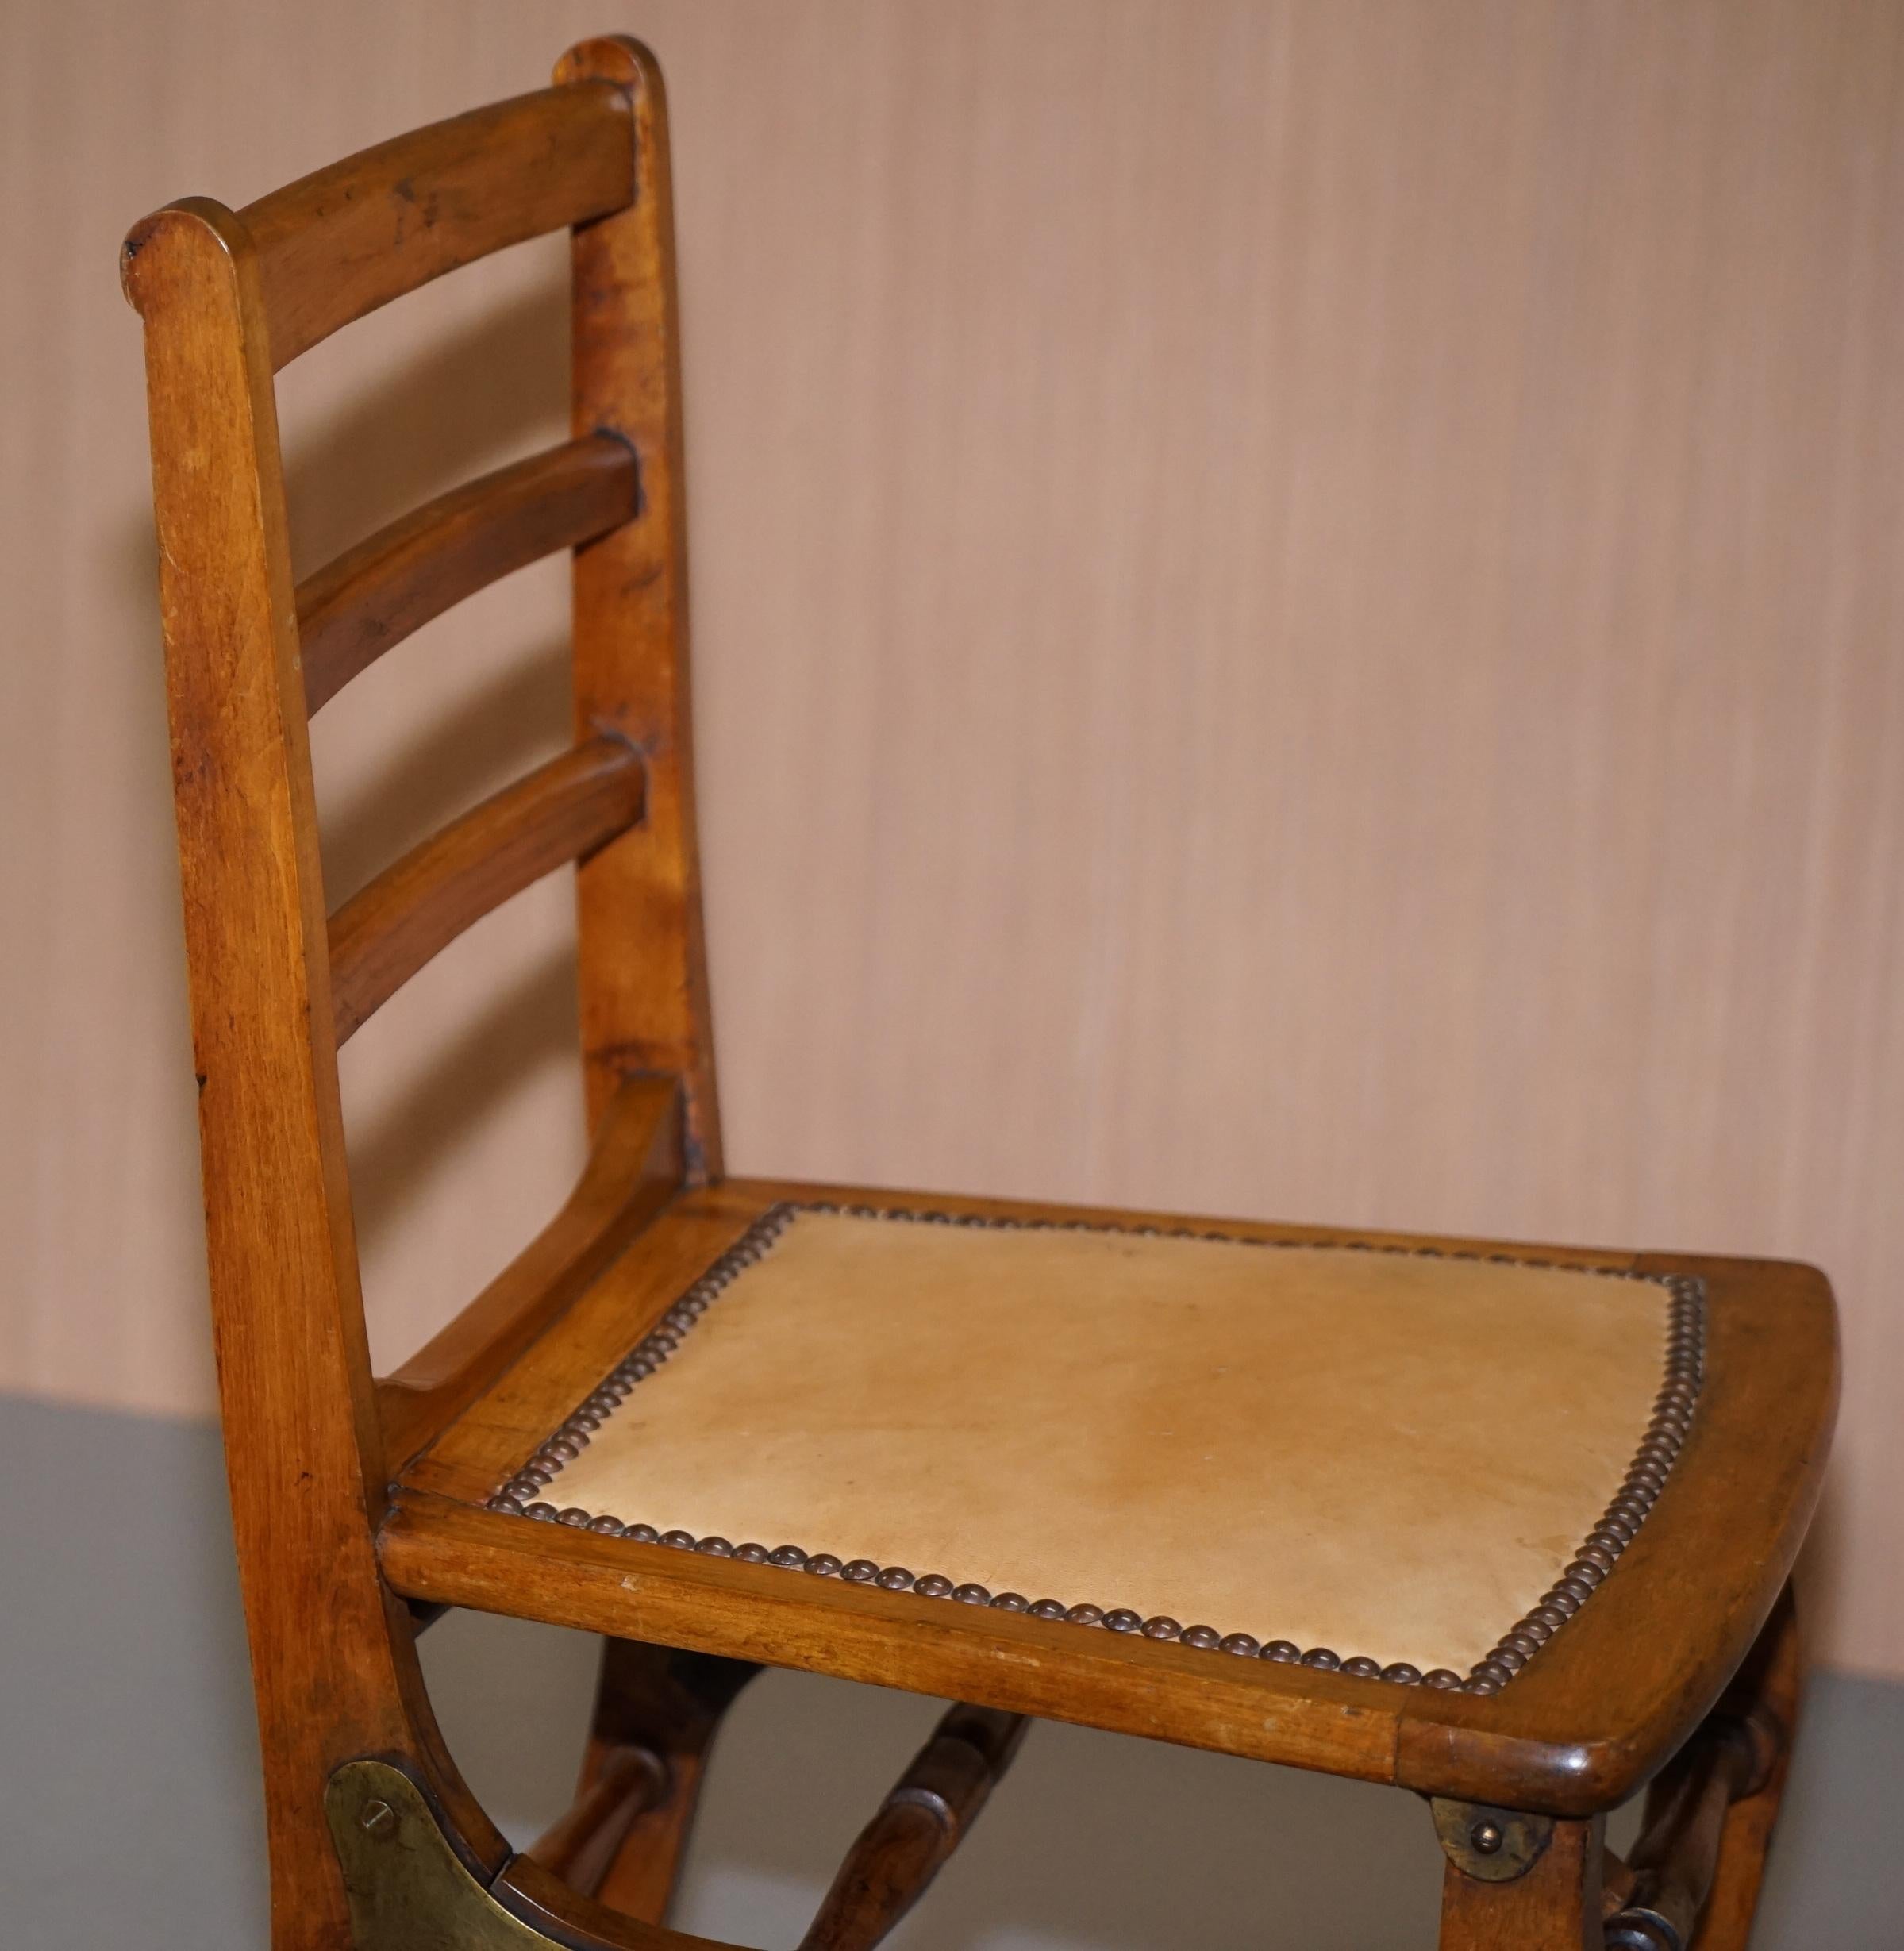 Rare circa 1890 Solid Fruitwood Brass Fitting Military Campaign Folding Chair For Sale 5